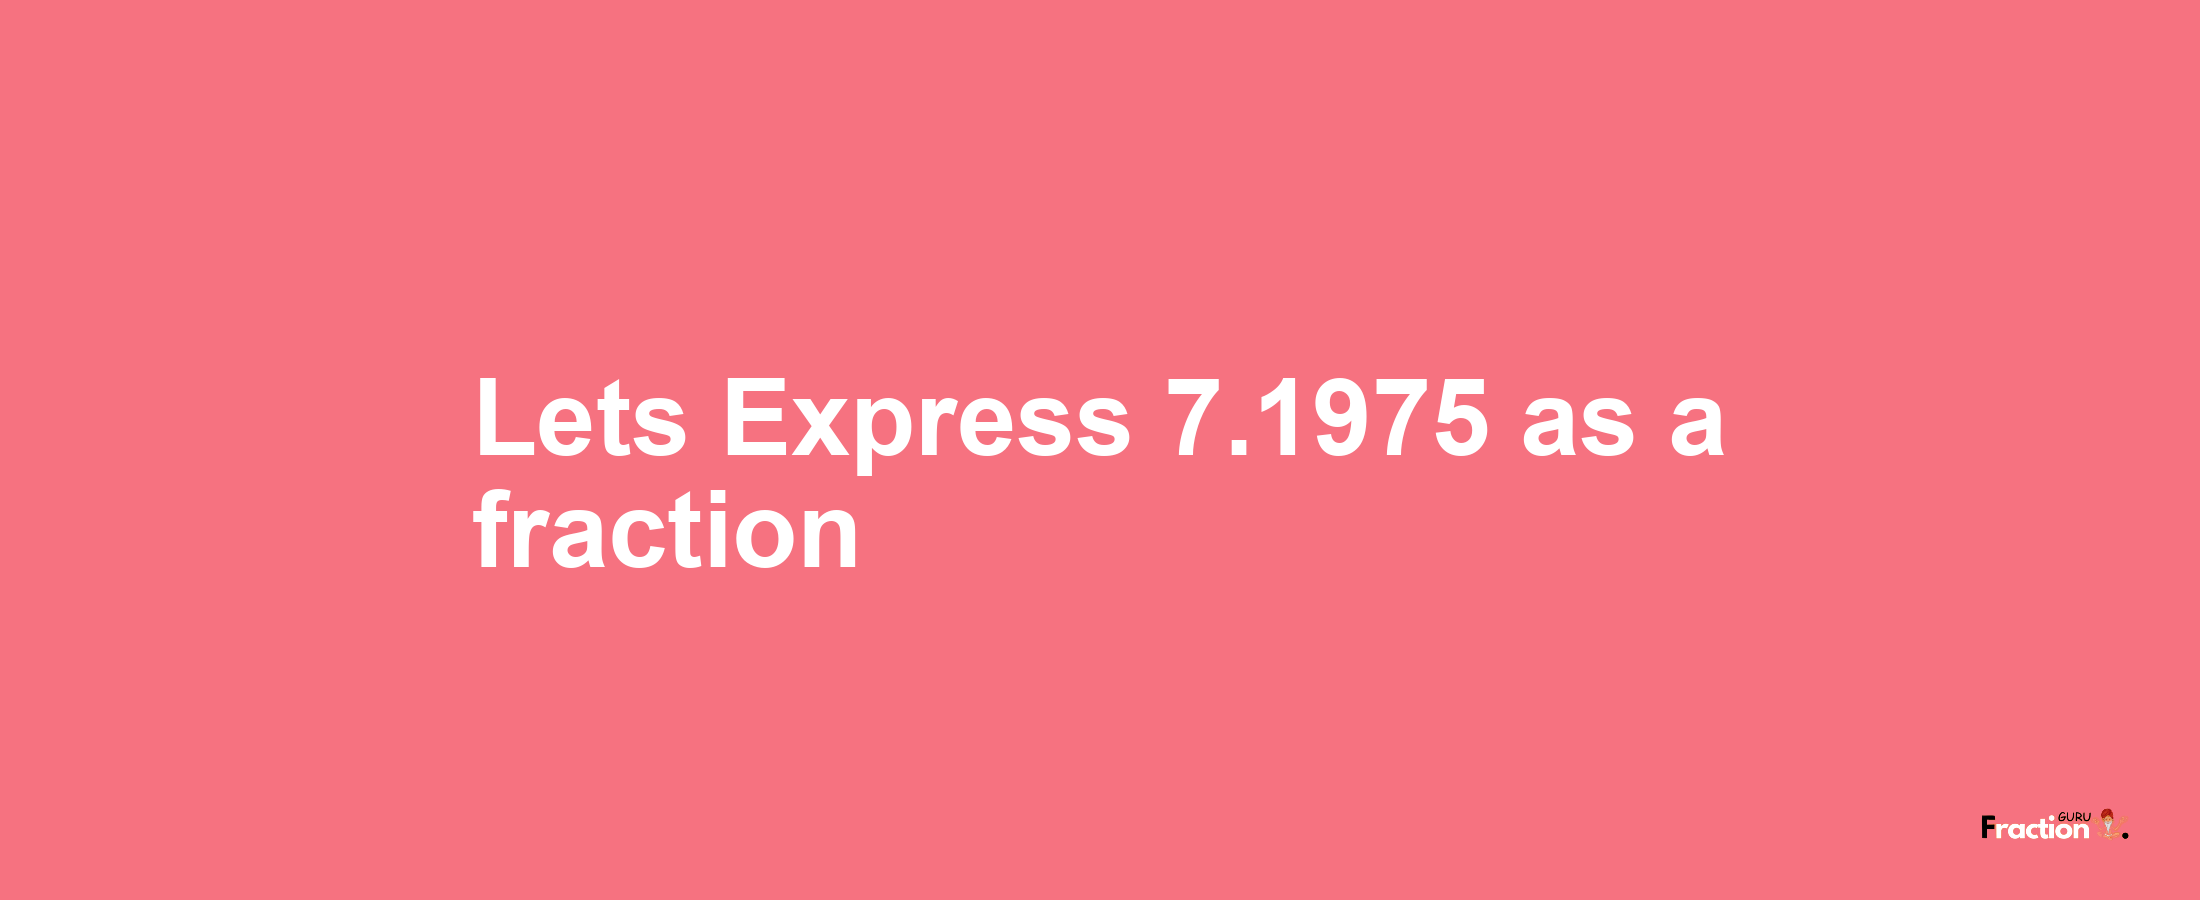 Lets Express 7.1975 as afraction